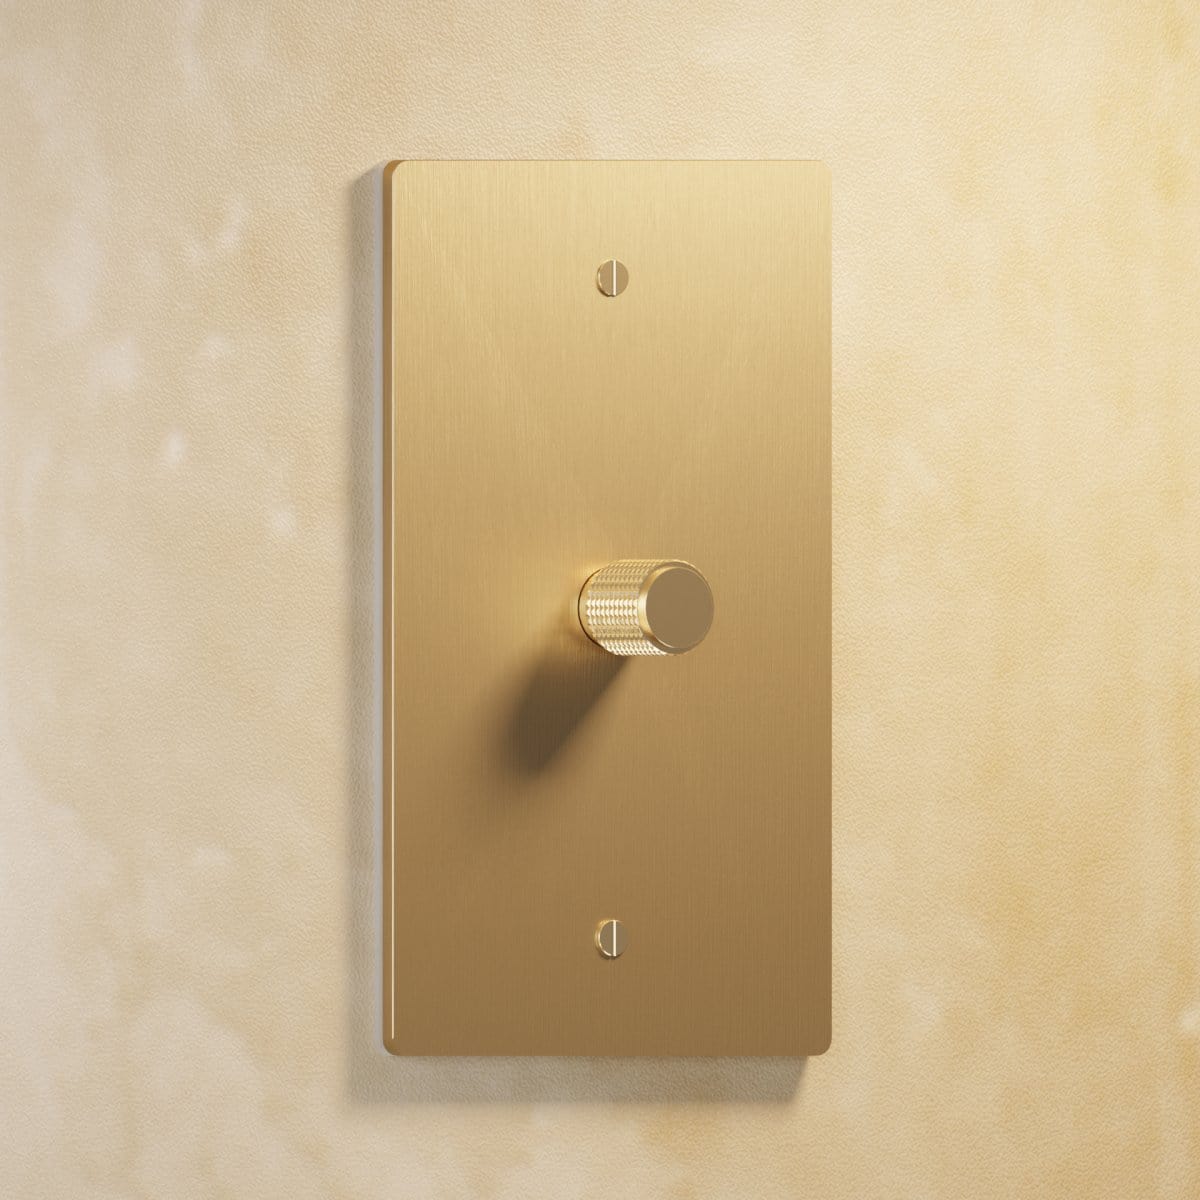 Residence Supply Brass Rotary Dimmer Switch (1-Gang)